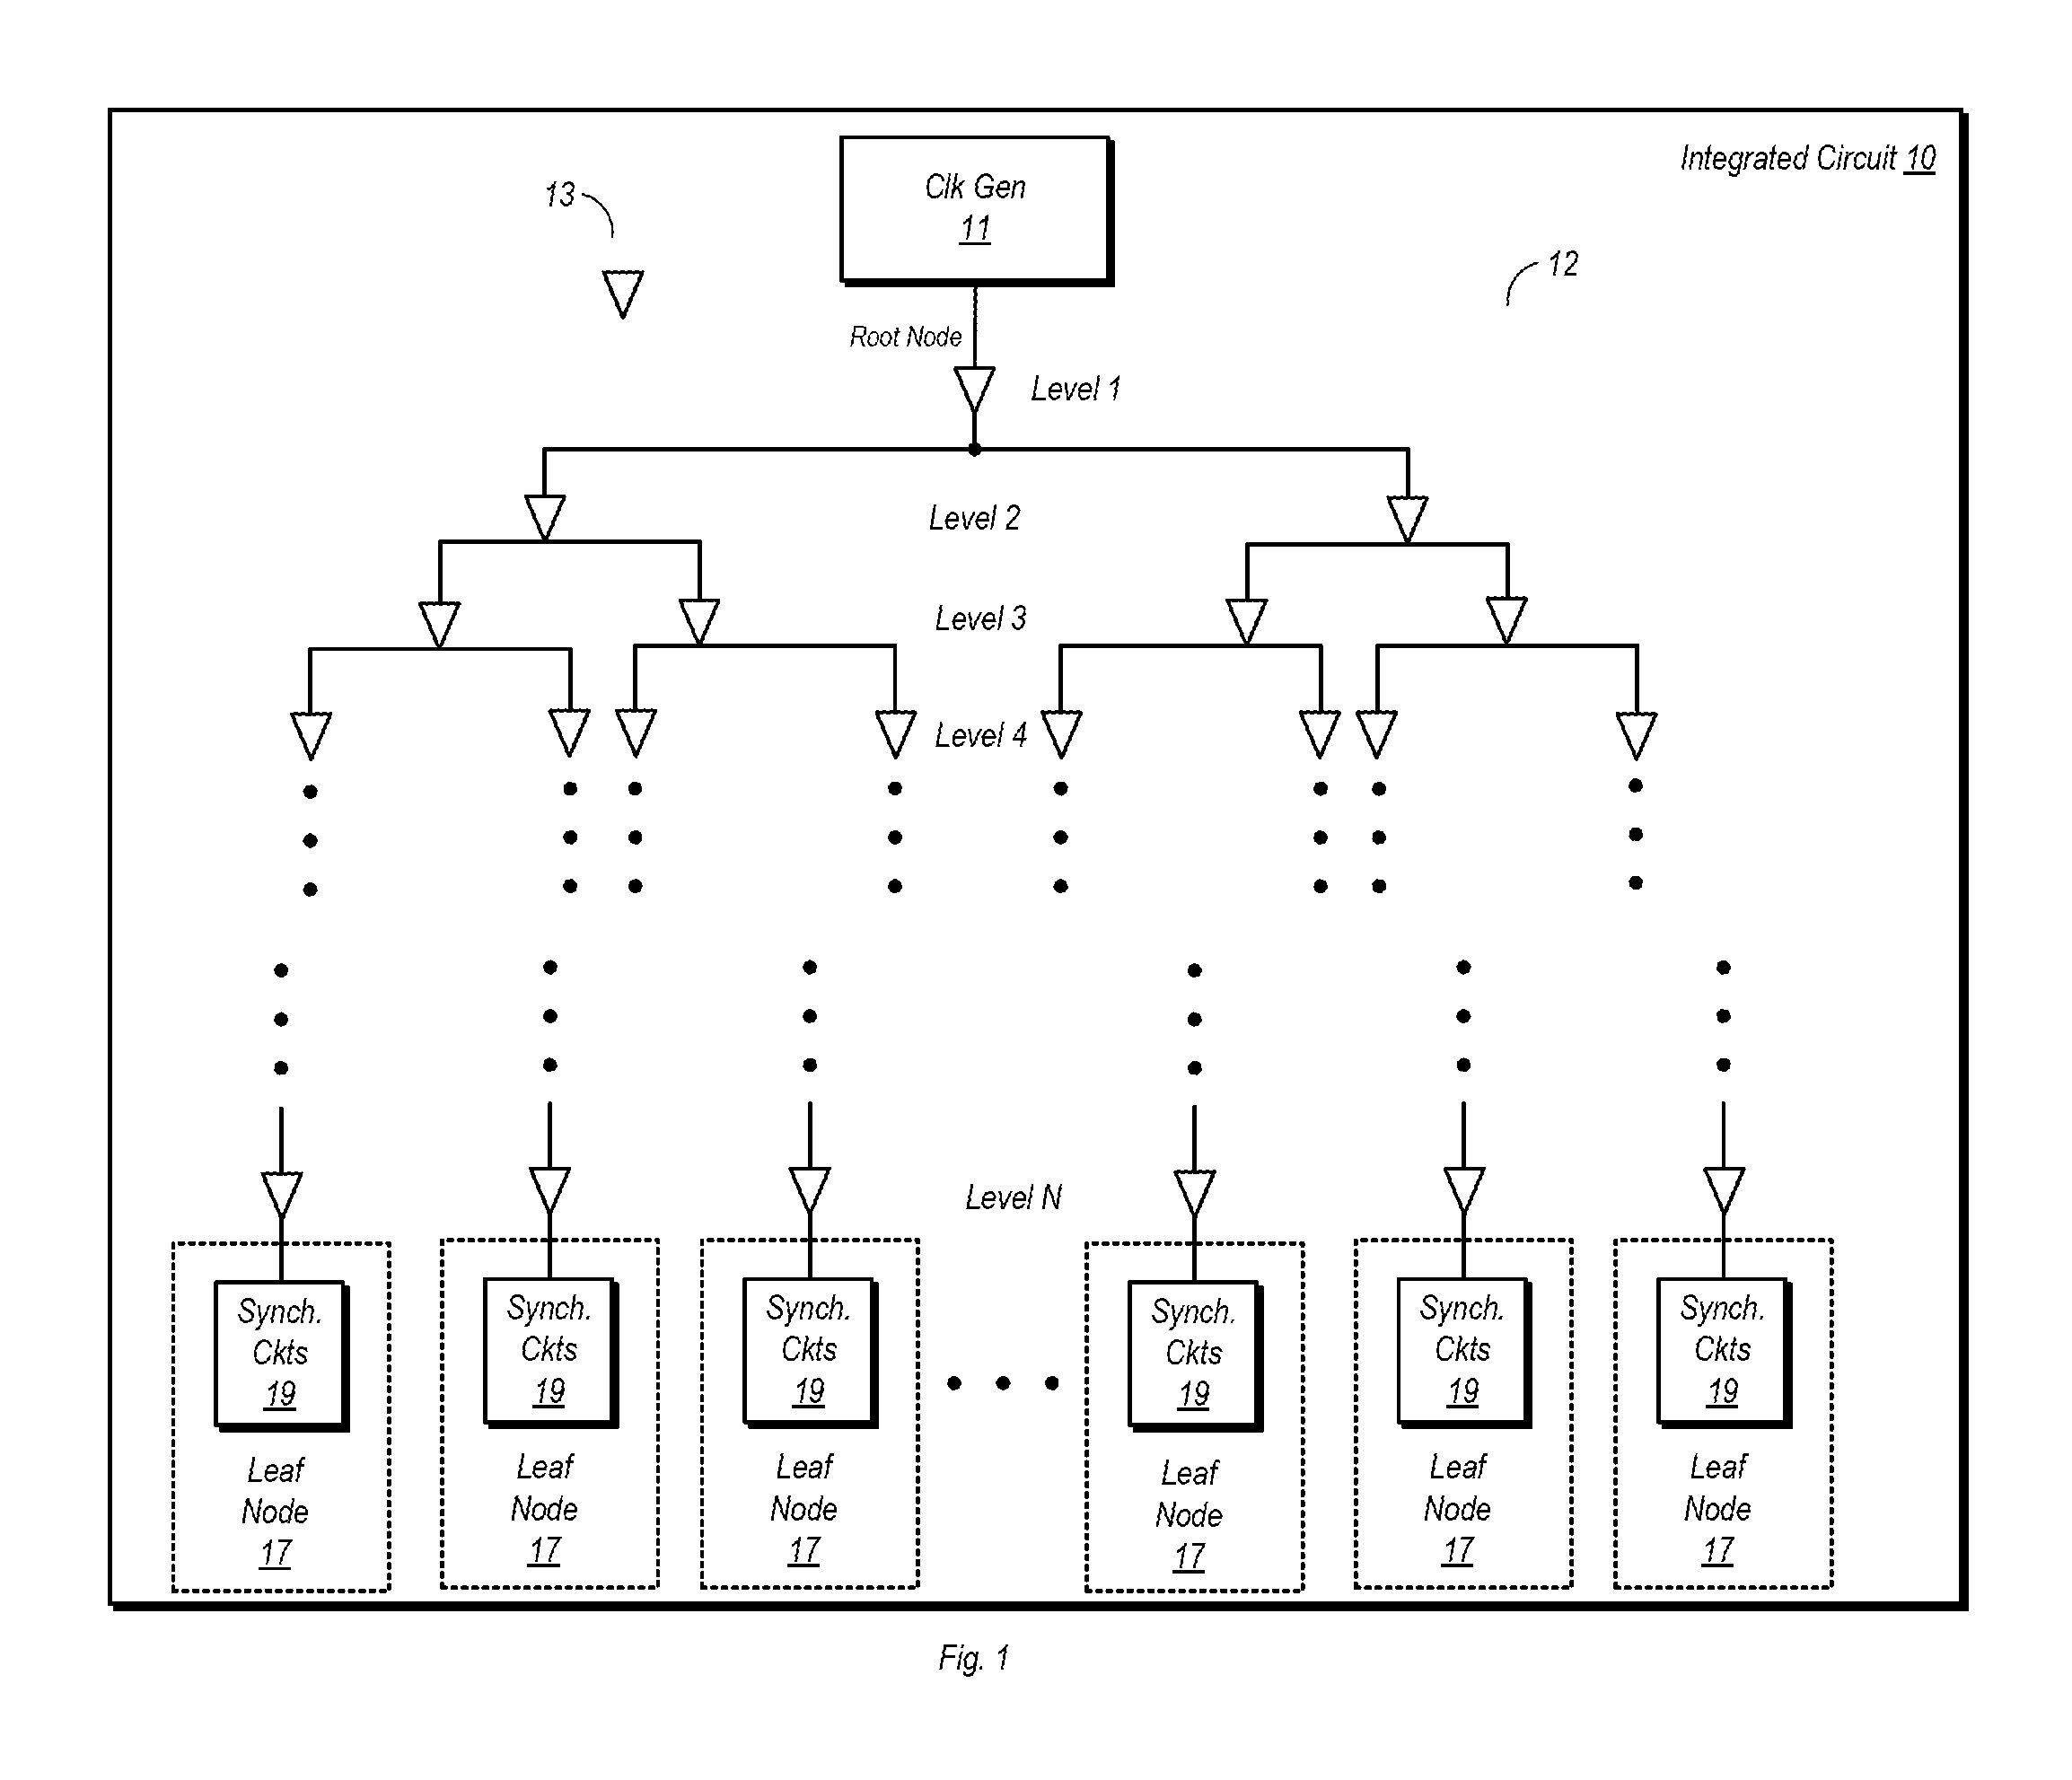 Power Source for Clock Distribution Network